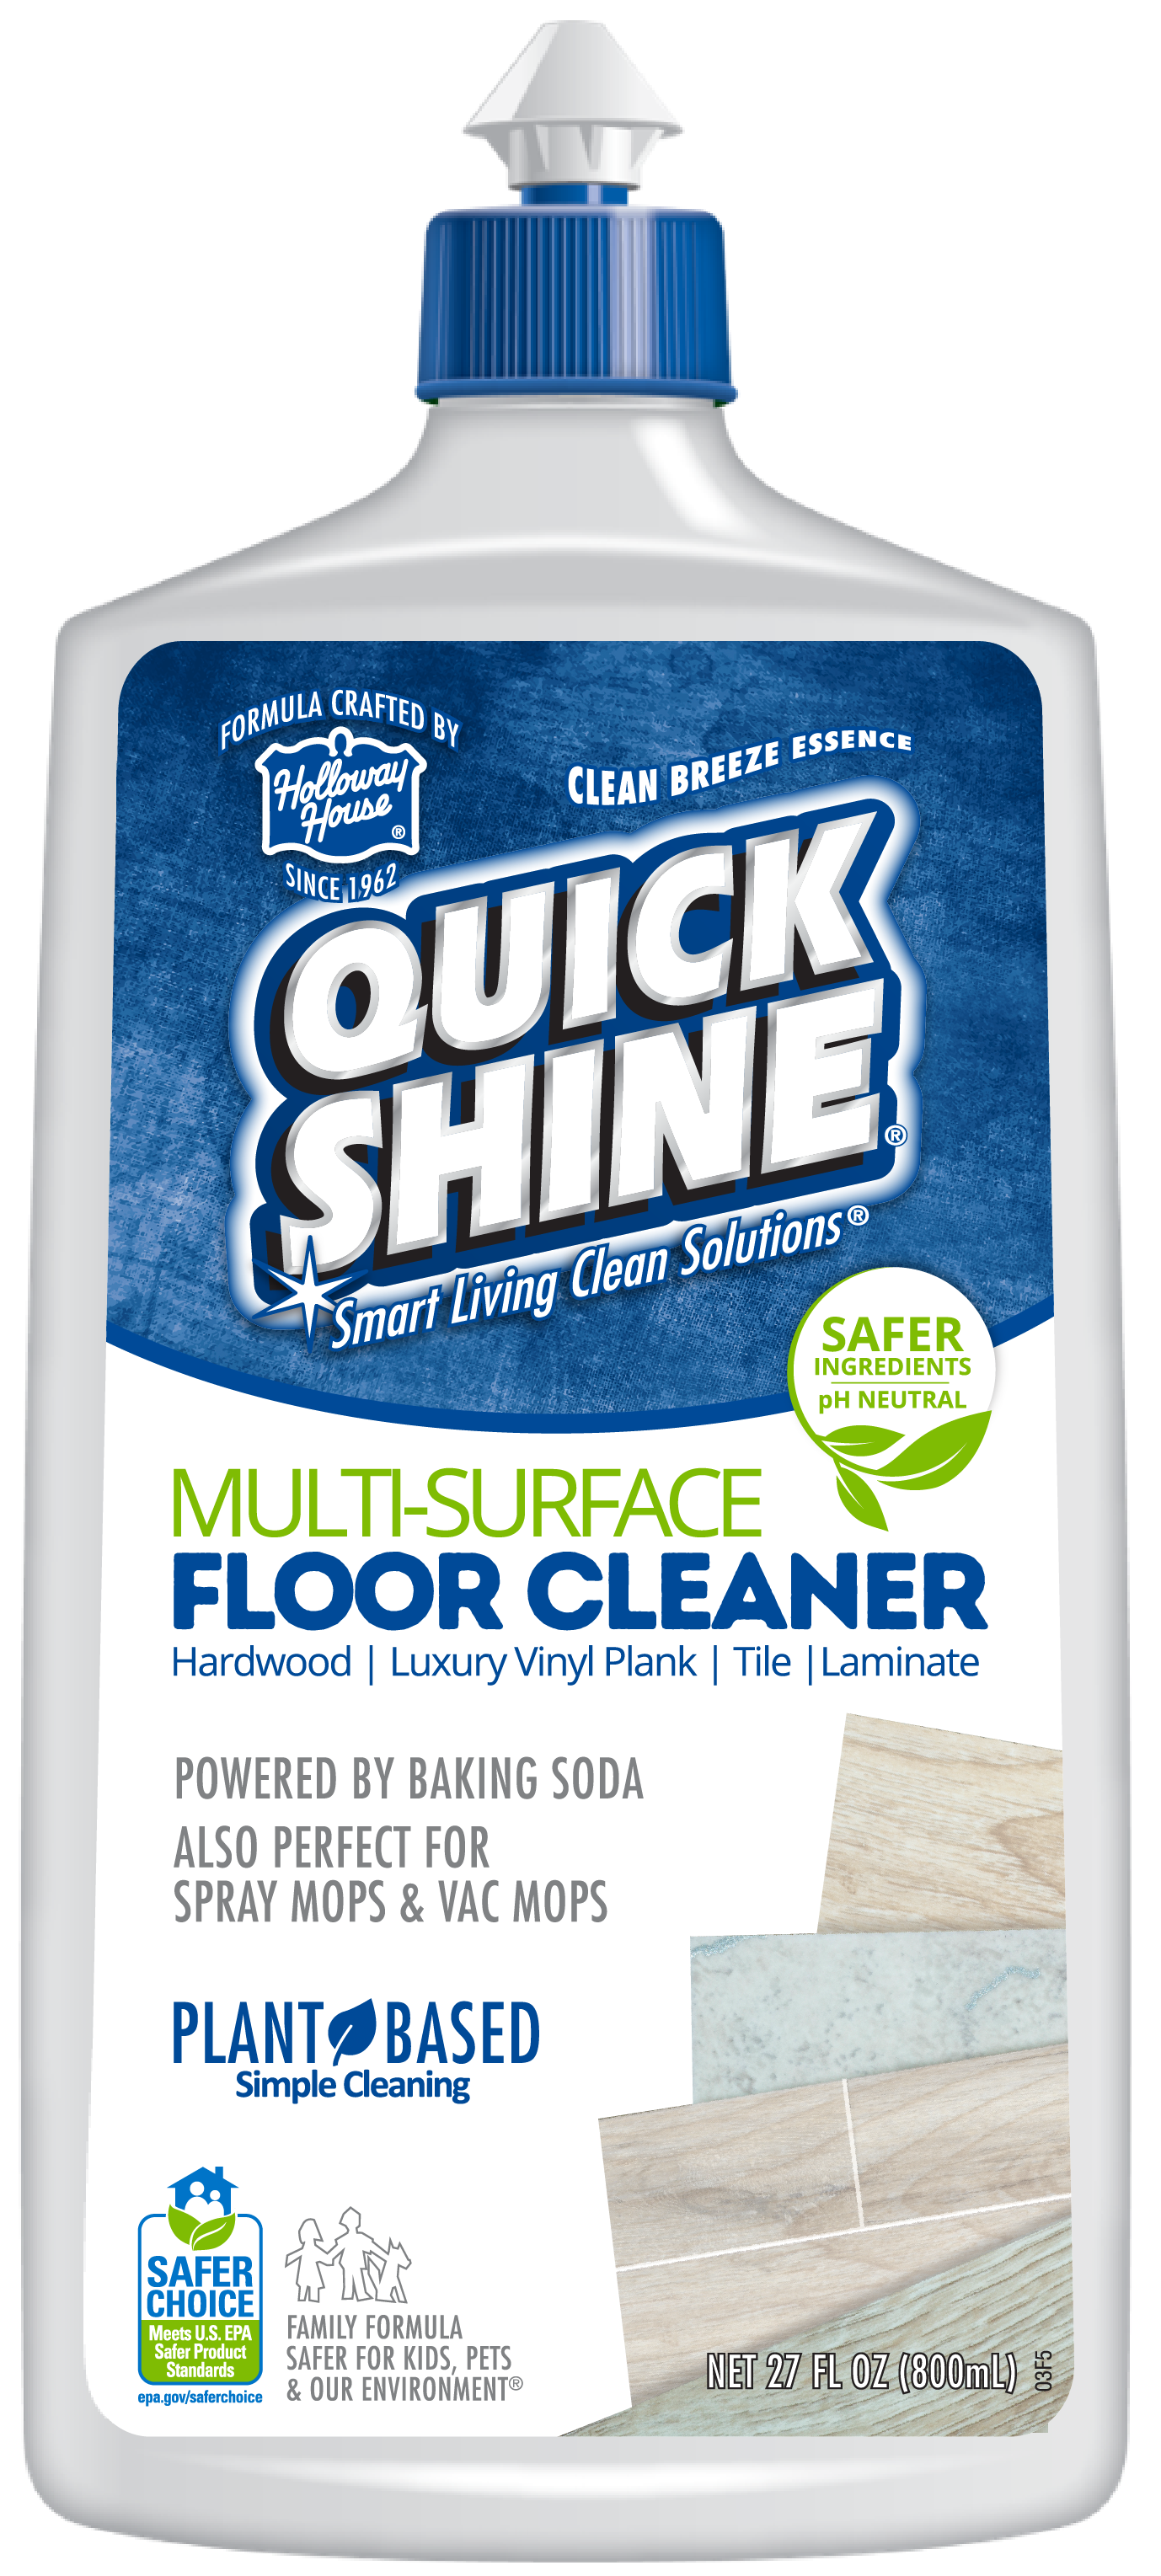 Quick Shine Multi-Surface Floor Cleaner, 27 oz, Fresh Scent - image 1 of 18